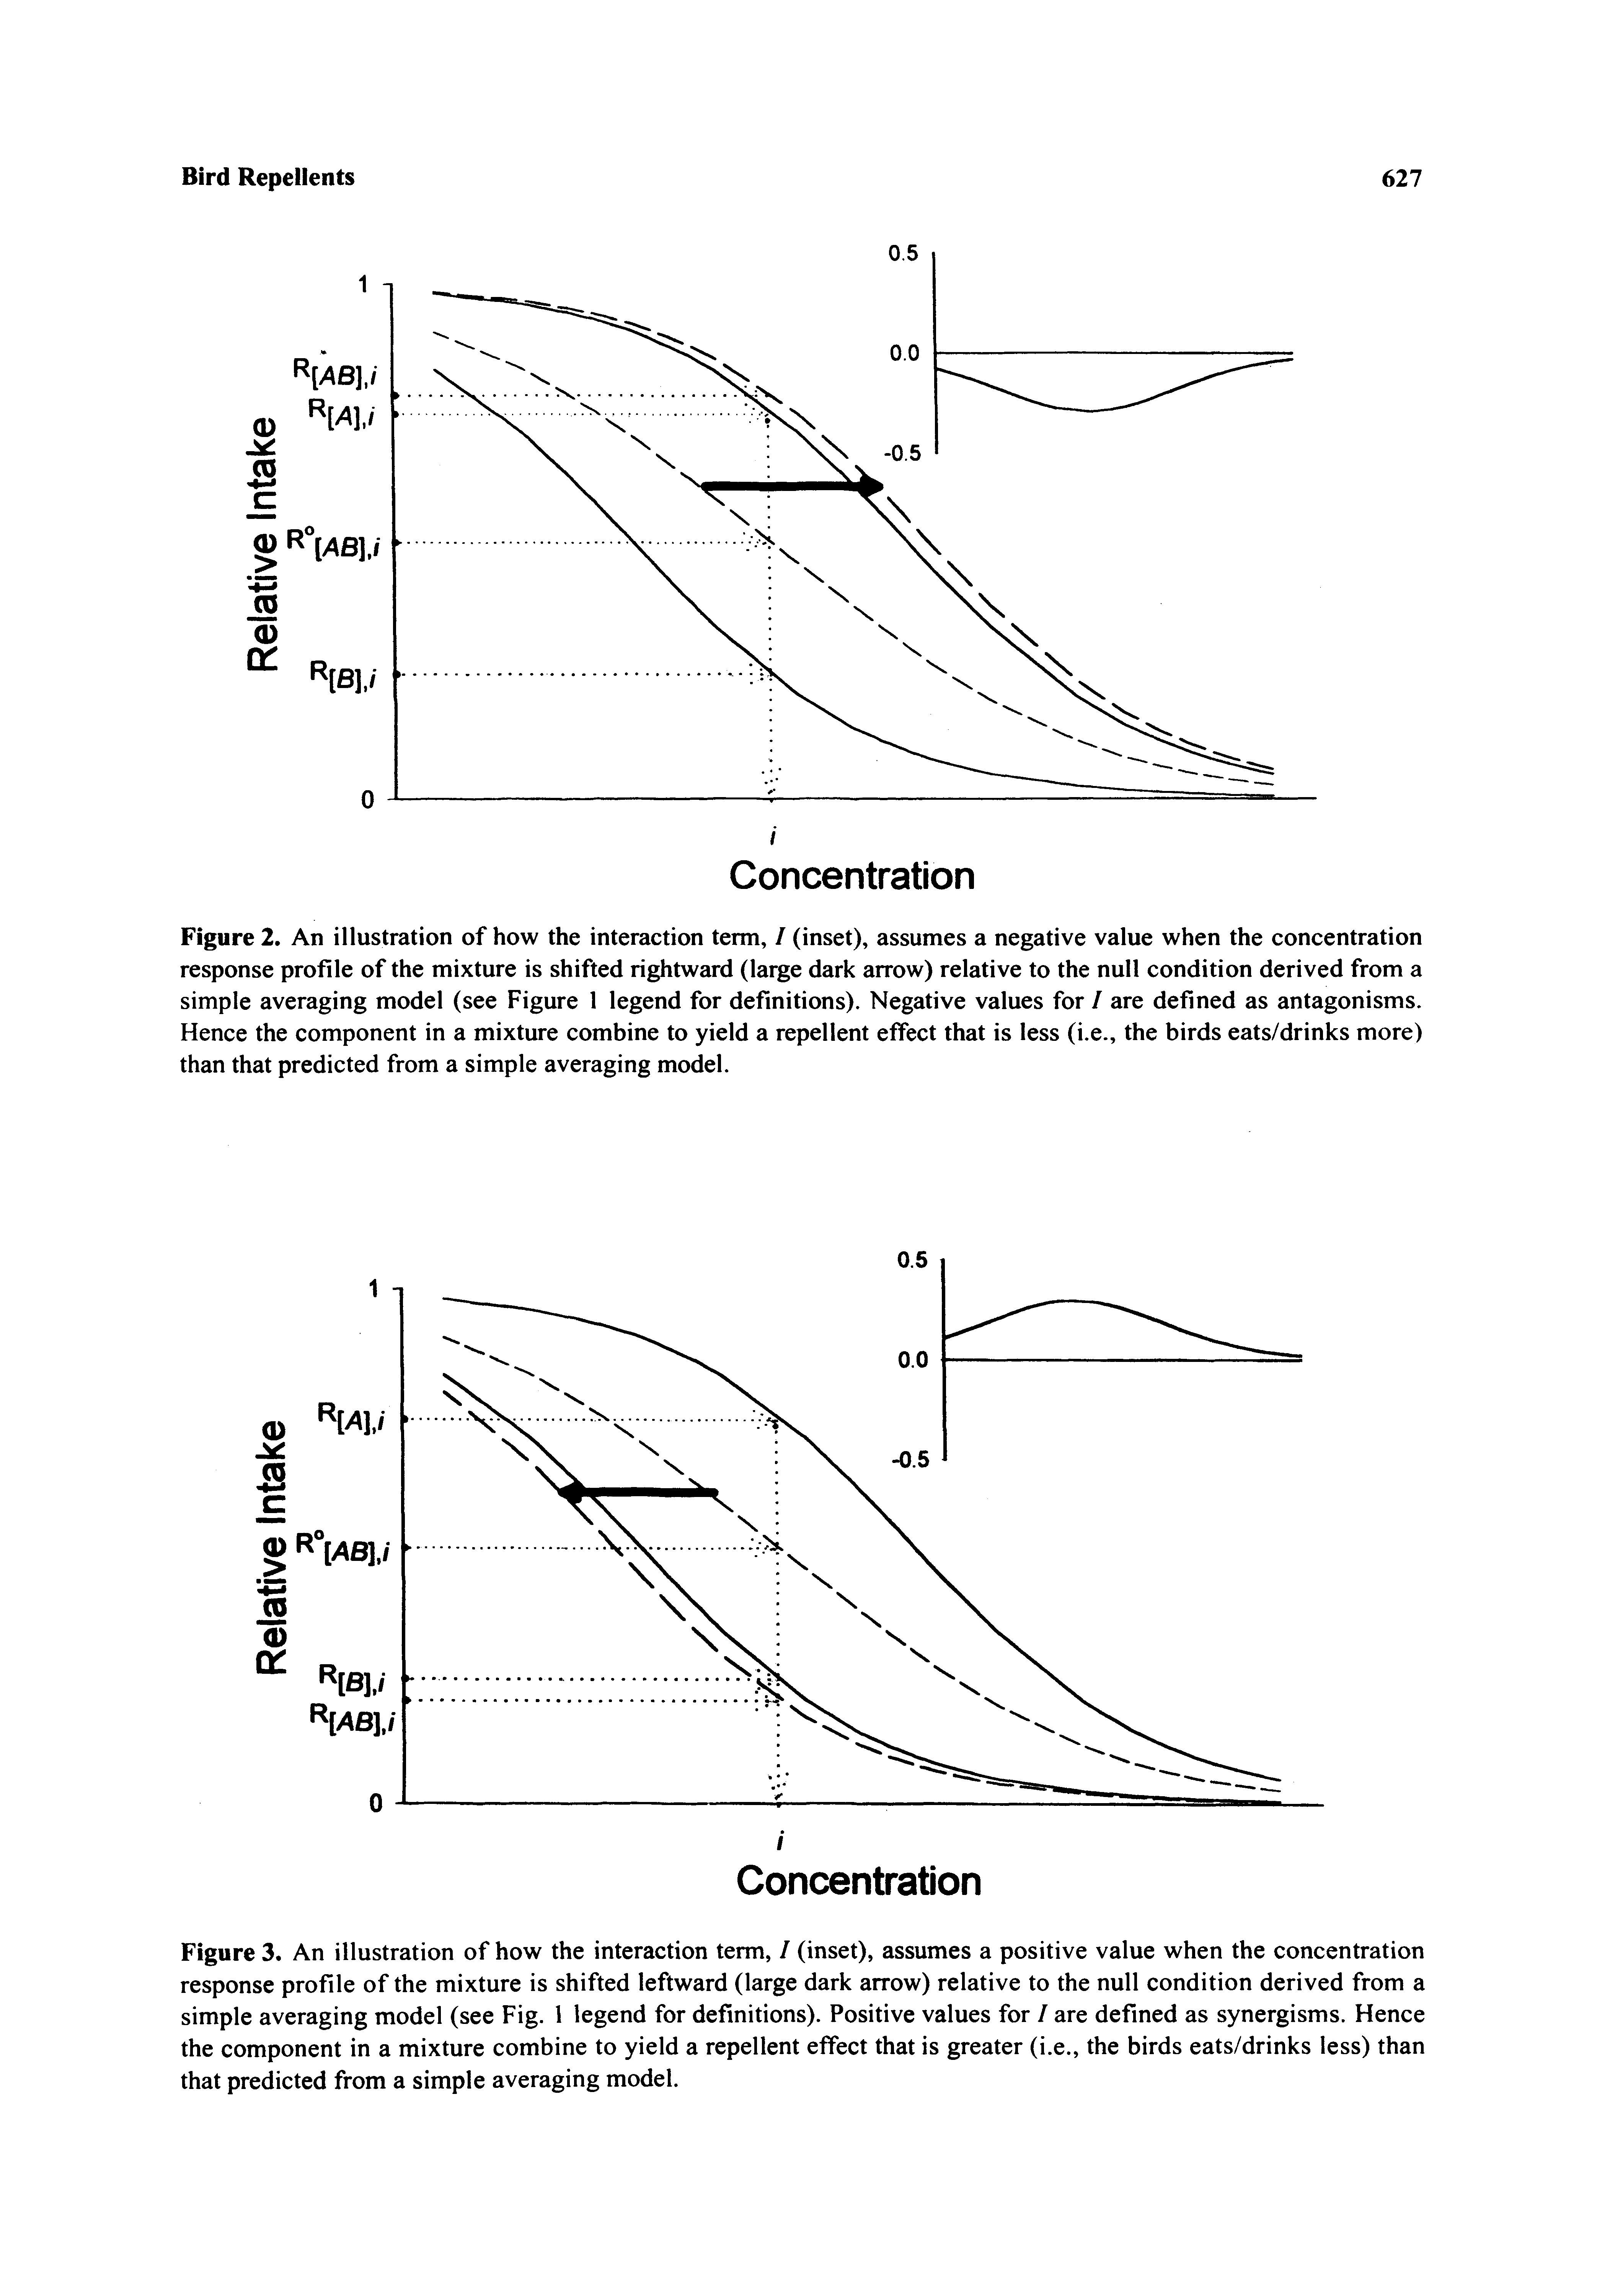 Figure 2. An illustration of how the interaction term, / (inset), assumes a negative value when the concentration response profile of the mixture is shifted rightward (large dark arrow) relative to the null condition derived from a simple averaging model (see Figure 1 legend for definitions). Negative values for / are defined as antagonisms. Hence the component in a mixture combine to yield a repellent effect that is less (i.e., the birds eats/drinks more) than that predicted from a simple averaging model.